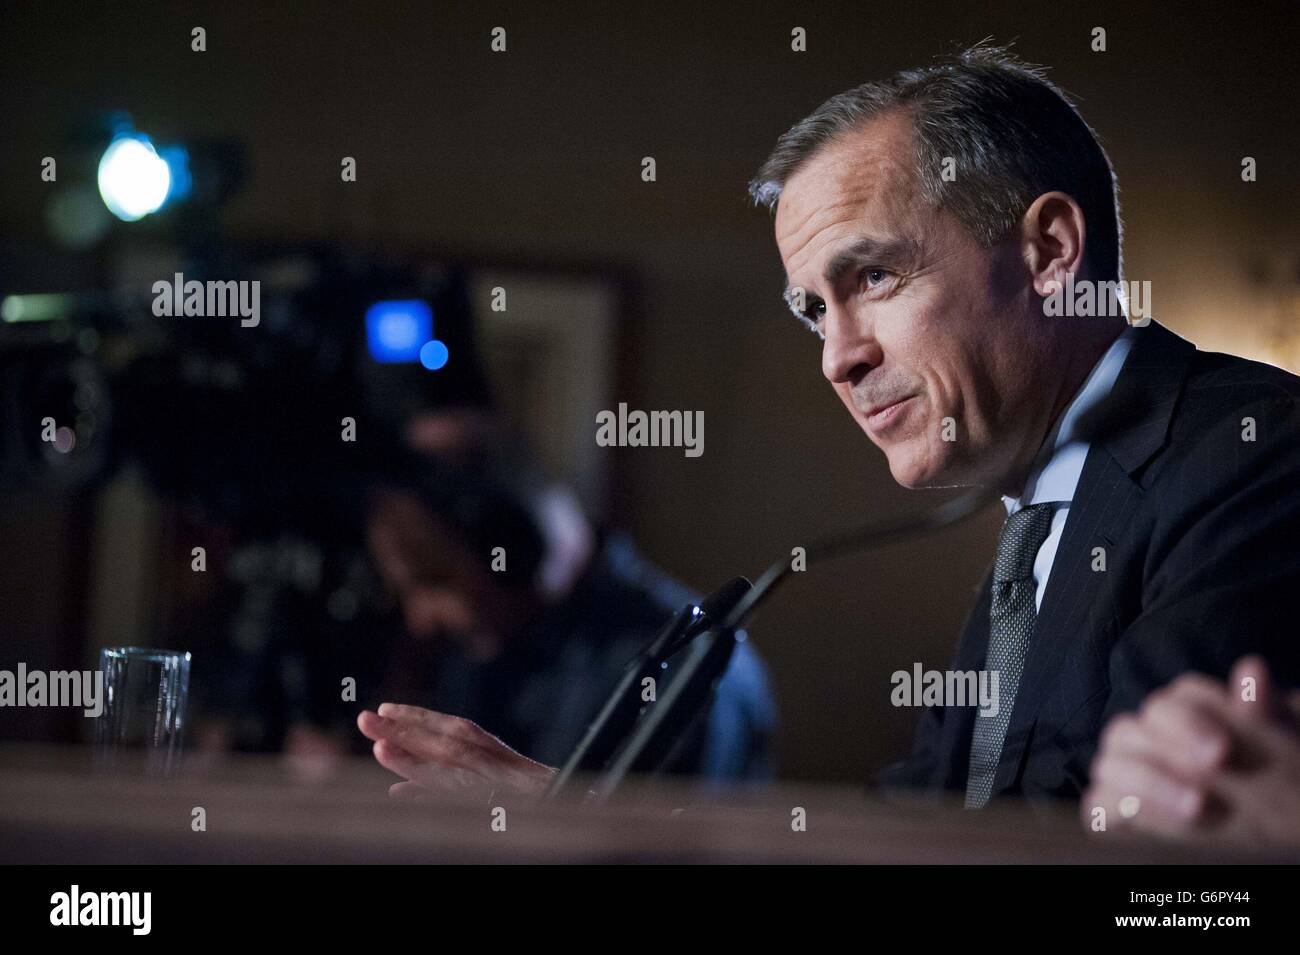 Bank of England governor Mark Carney gives a speech at the George Hotel in Edinburgh during a Scottish Council of Development and Industry event. Stock Photo